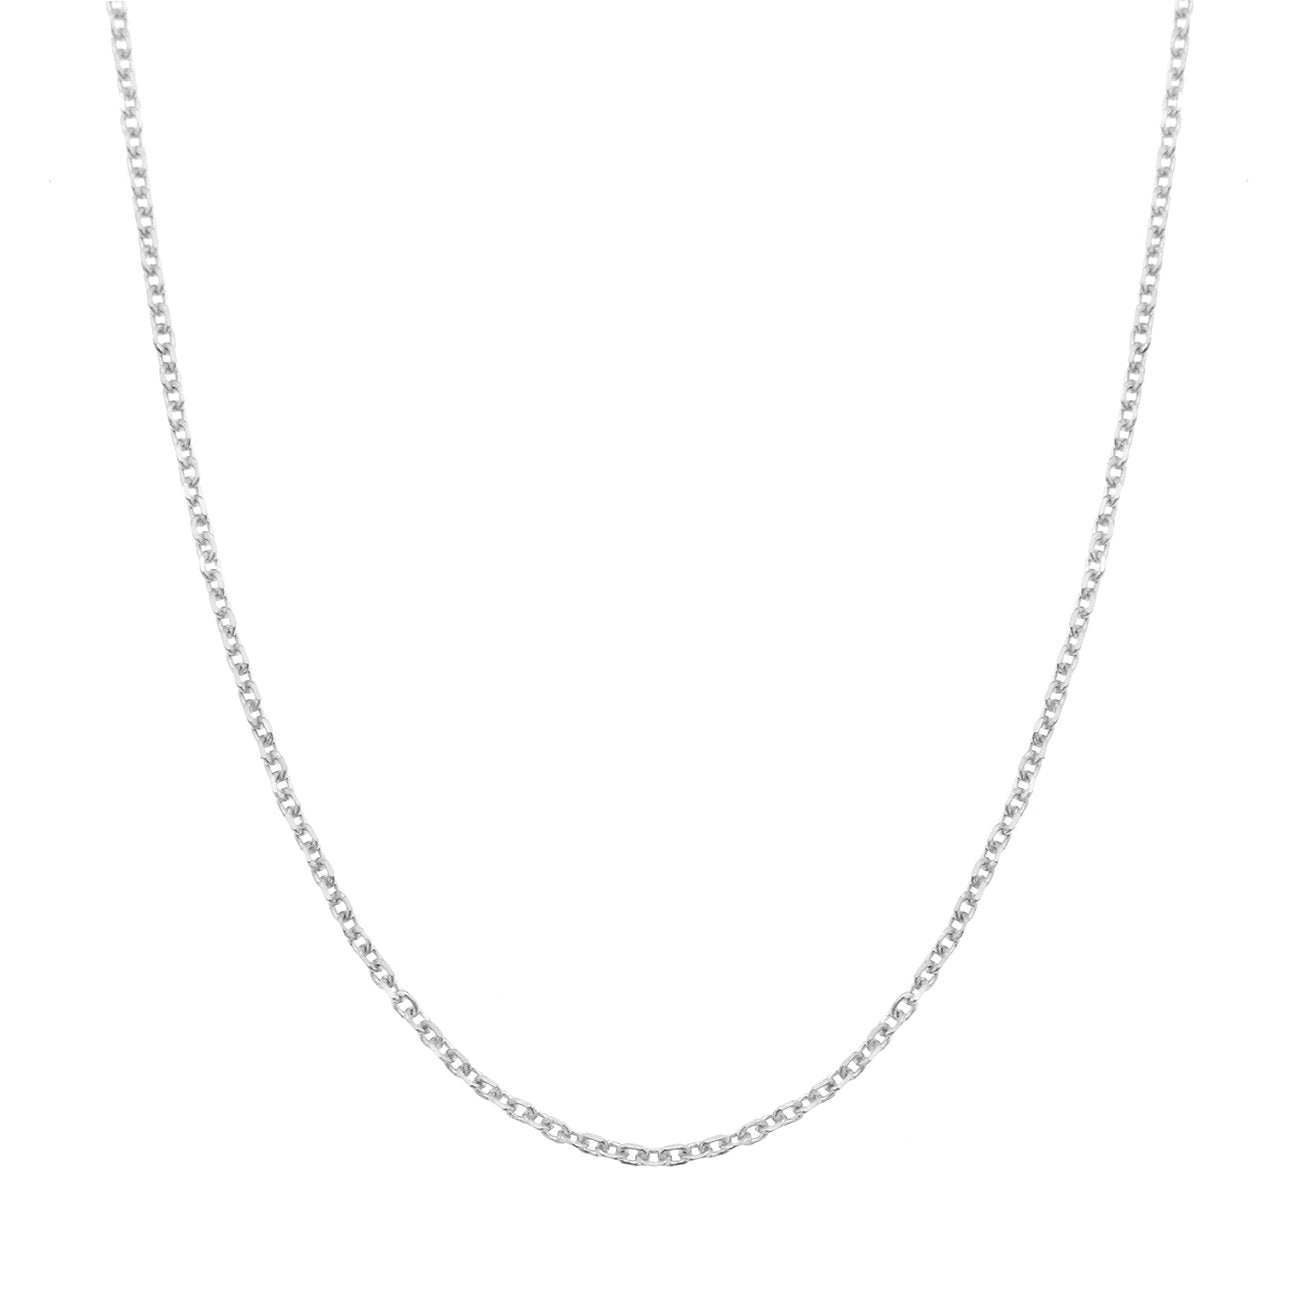 Chain - Sterling Silver